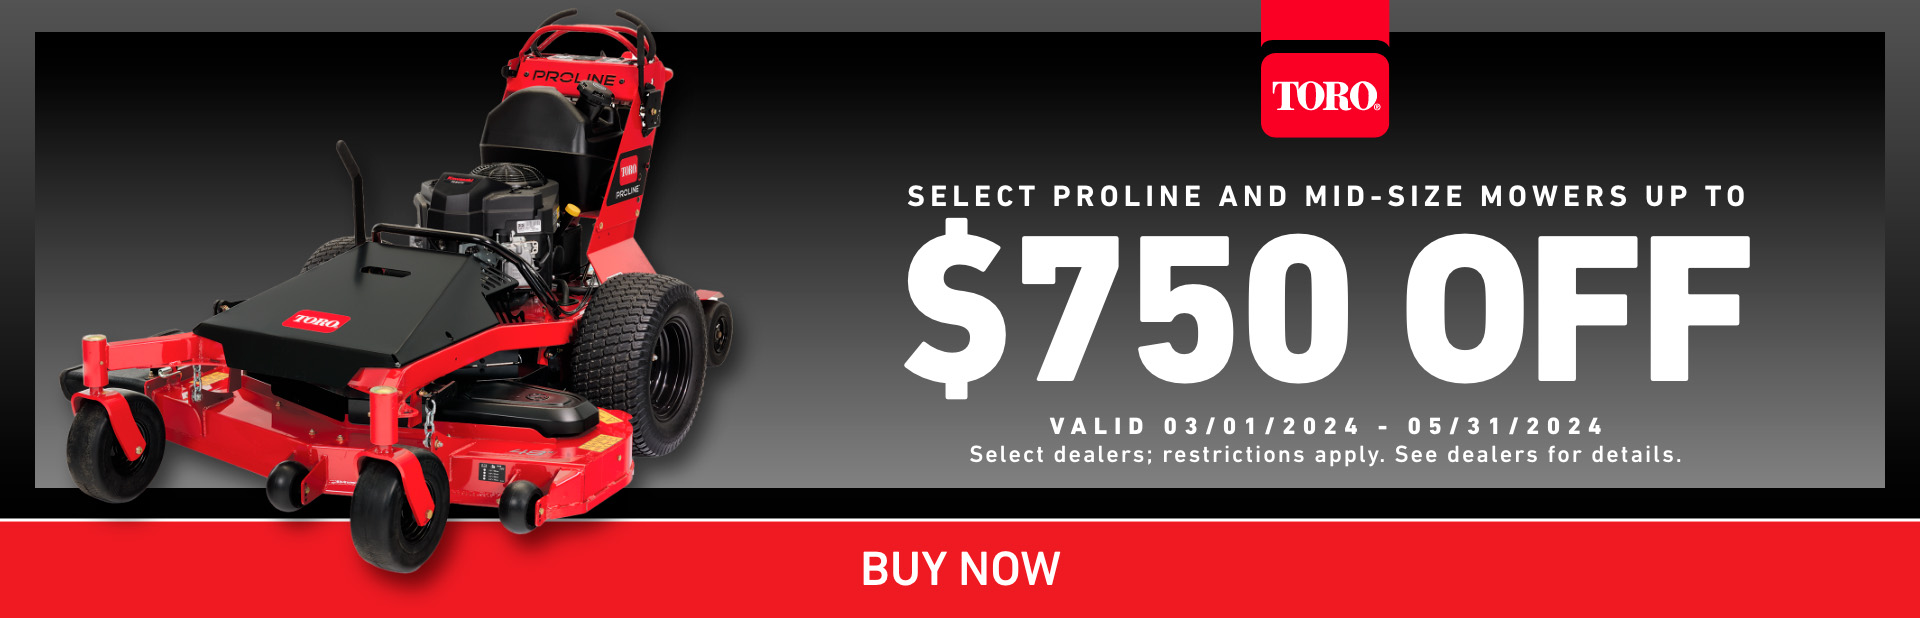 Up to $750 Off Select Proline and Mid-Size Mowers